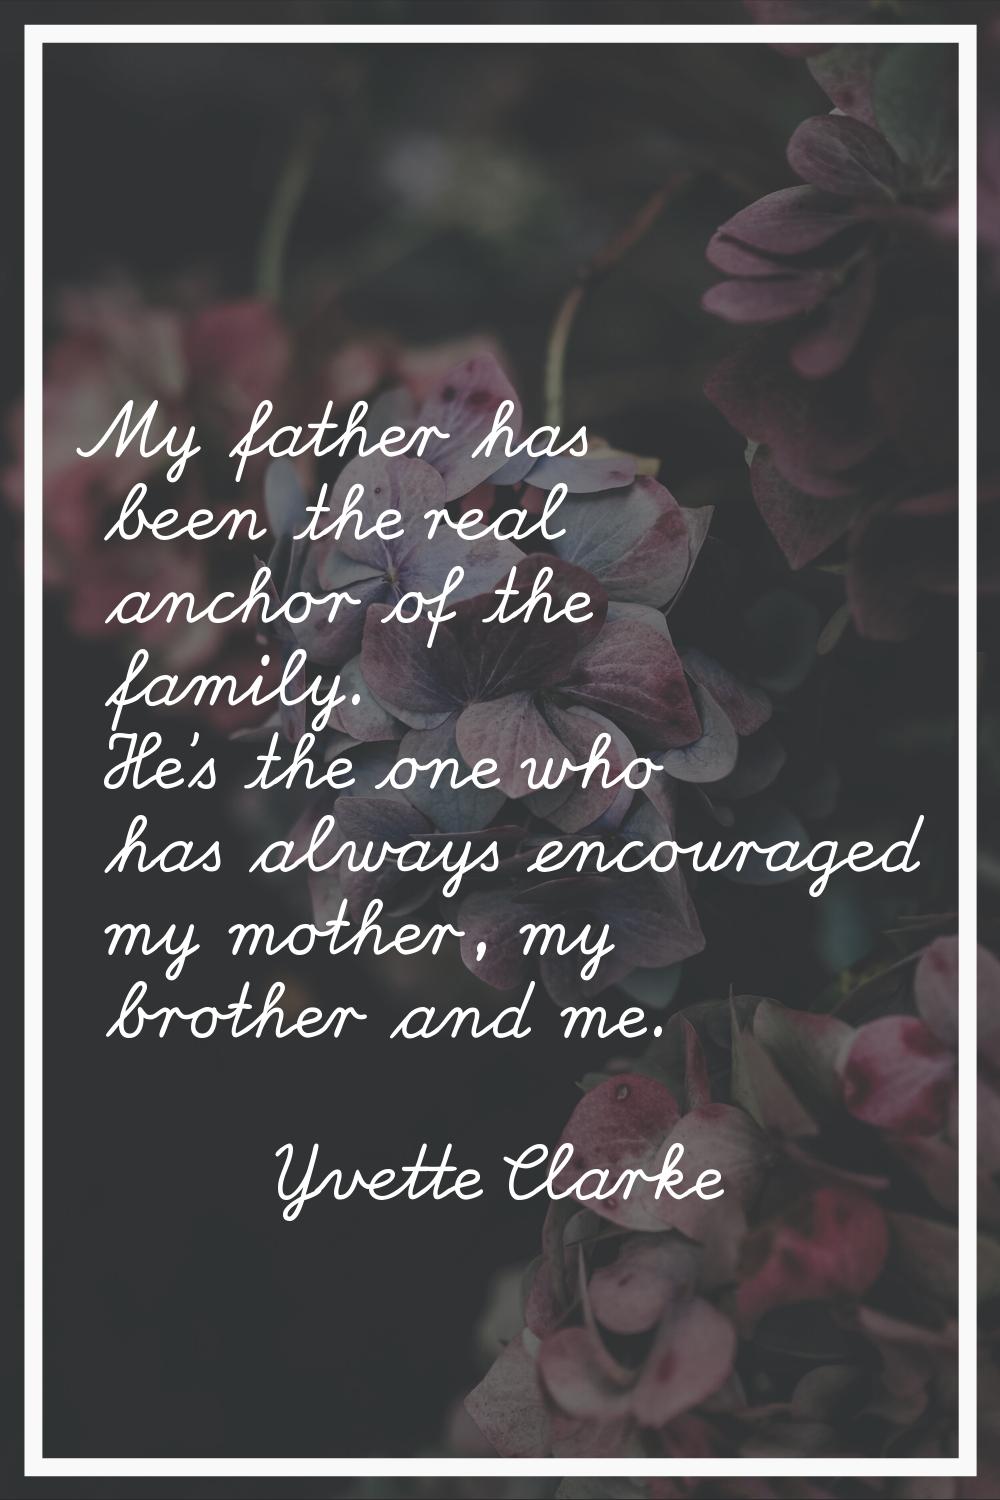 My father has been the real anchor of the family. He's the one who has always encouraged my mother,